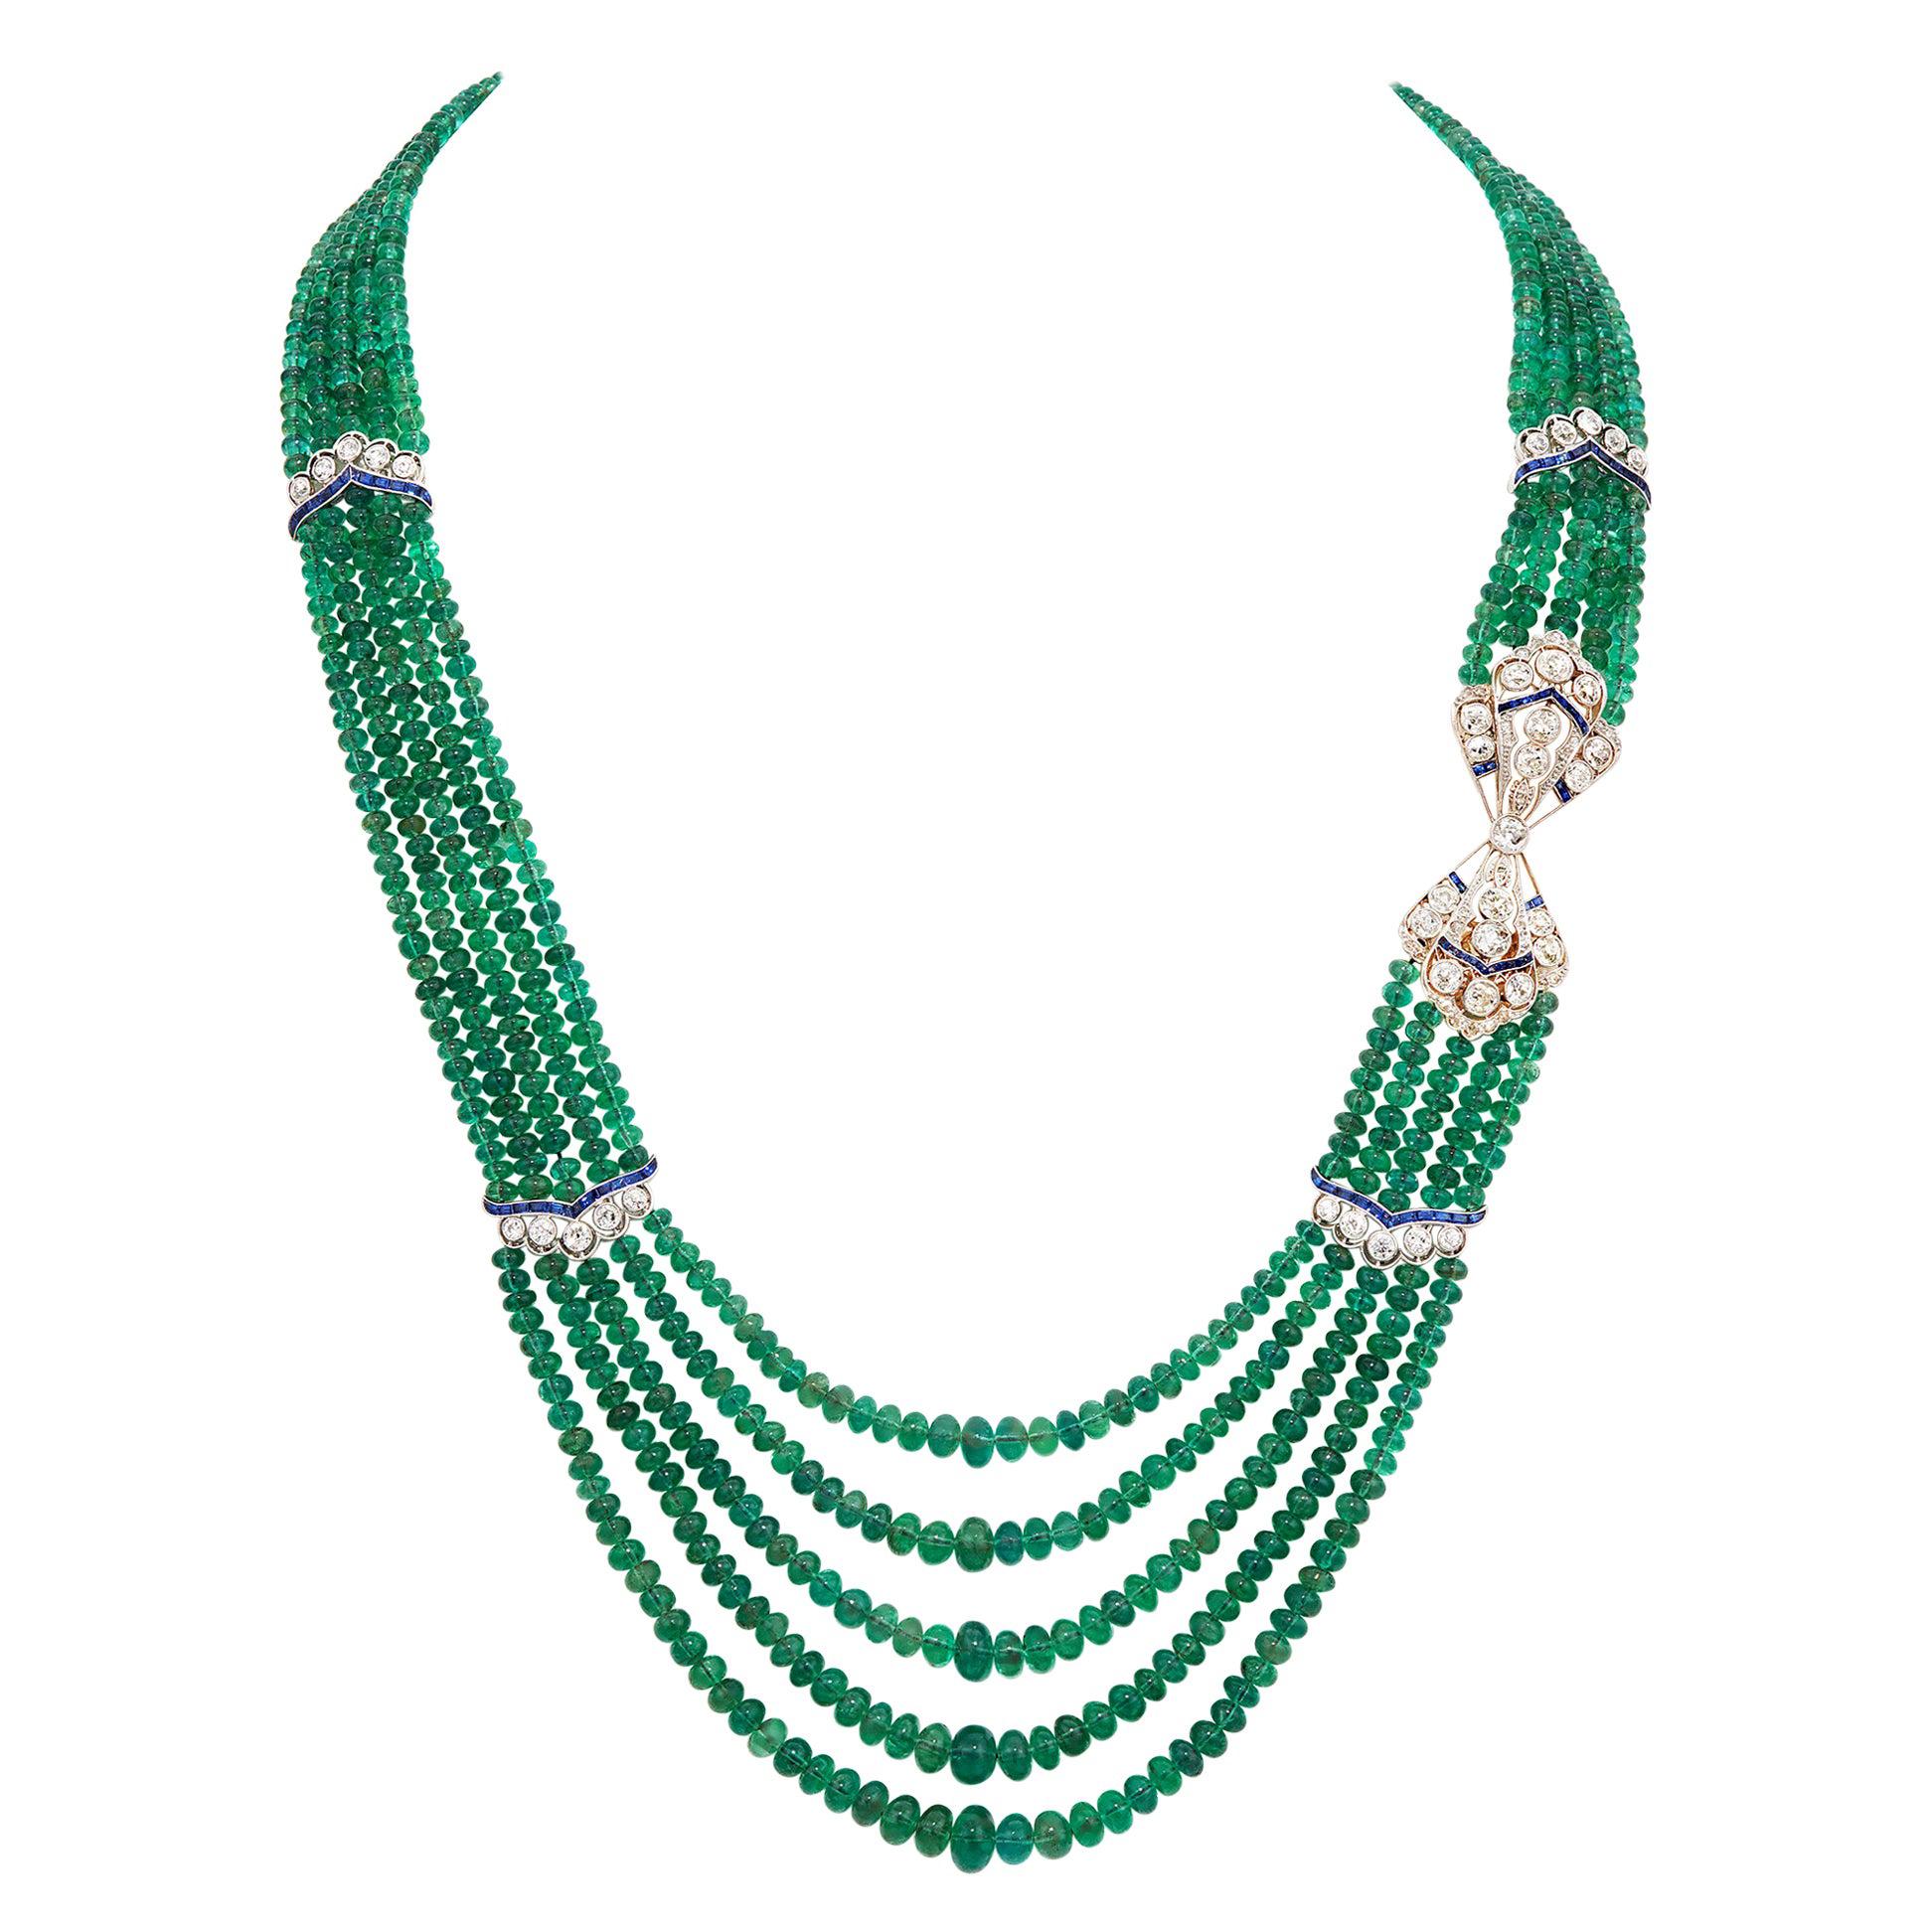 385 Carat 5-Strand Emerald Necklace with 9.06 Carat Sapphire and Diamond in Plat